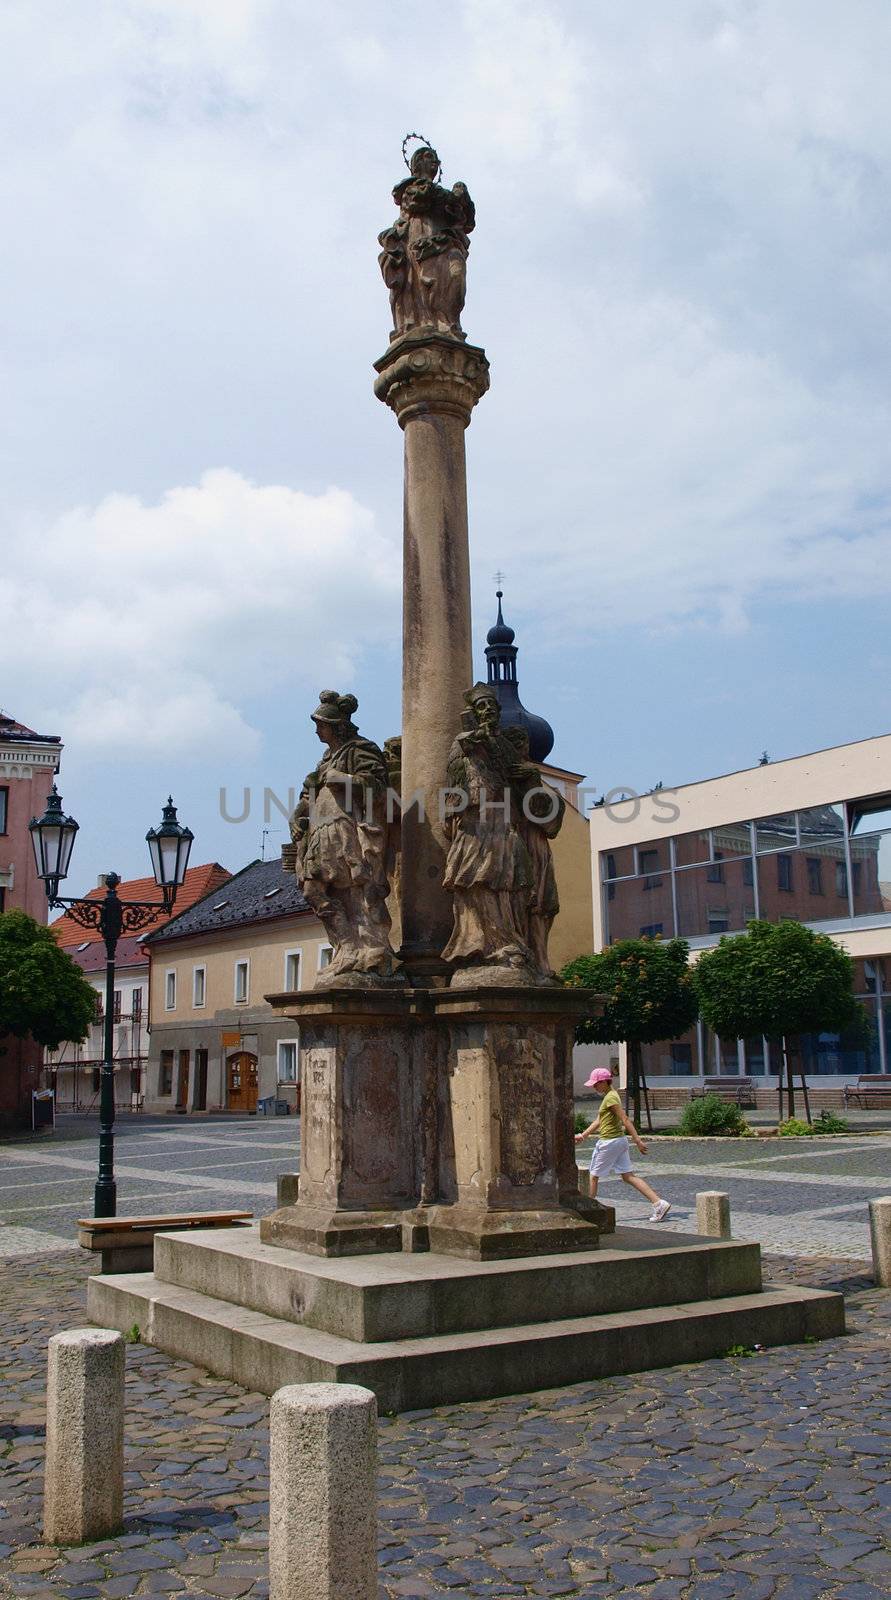 Plague Column on the square, this was built in Middle ages, when the pestilence caused death of many people in the town. Czech Republic, Cesky Dub